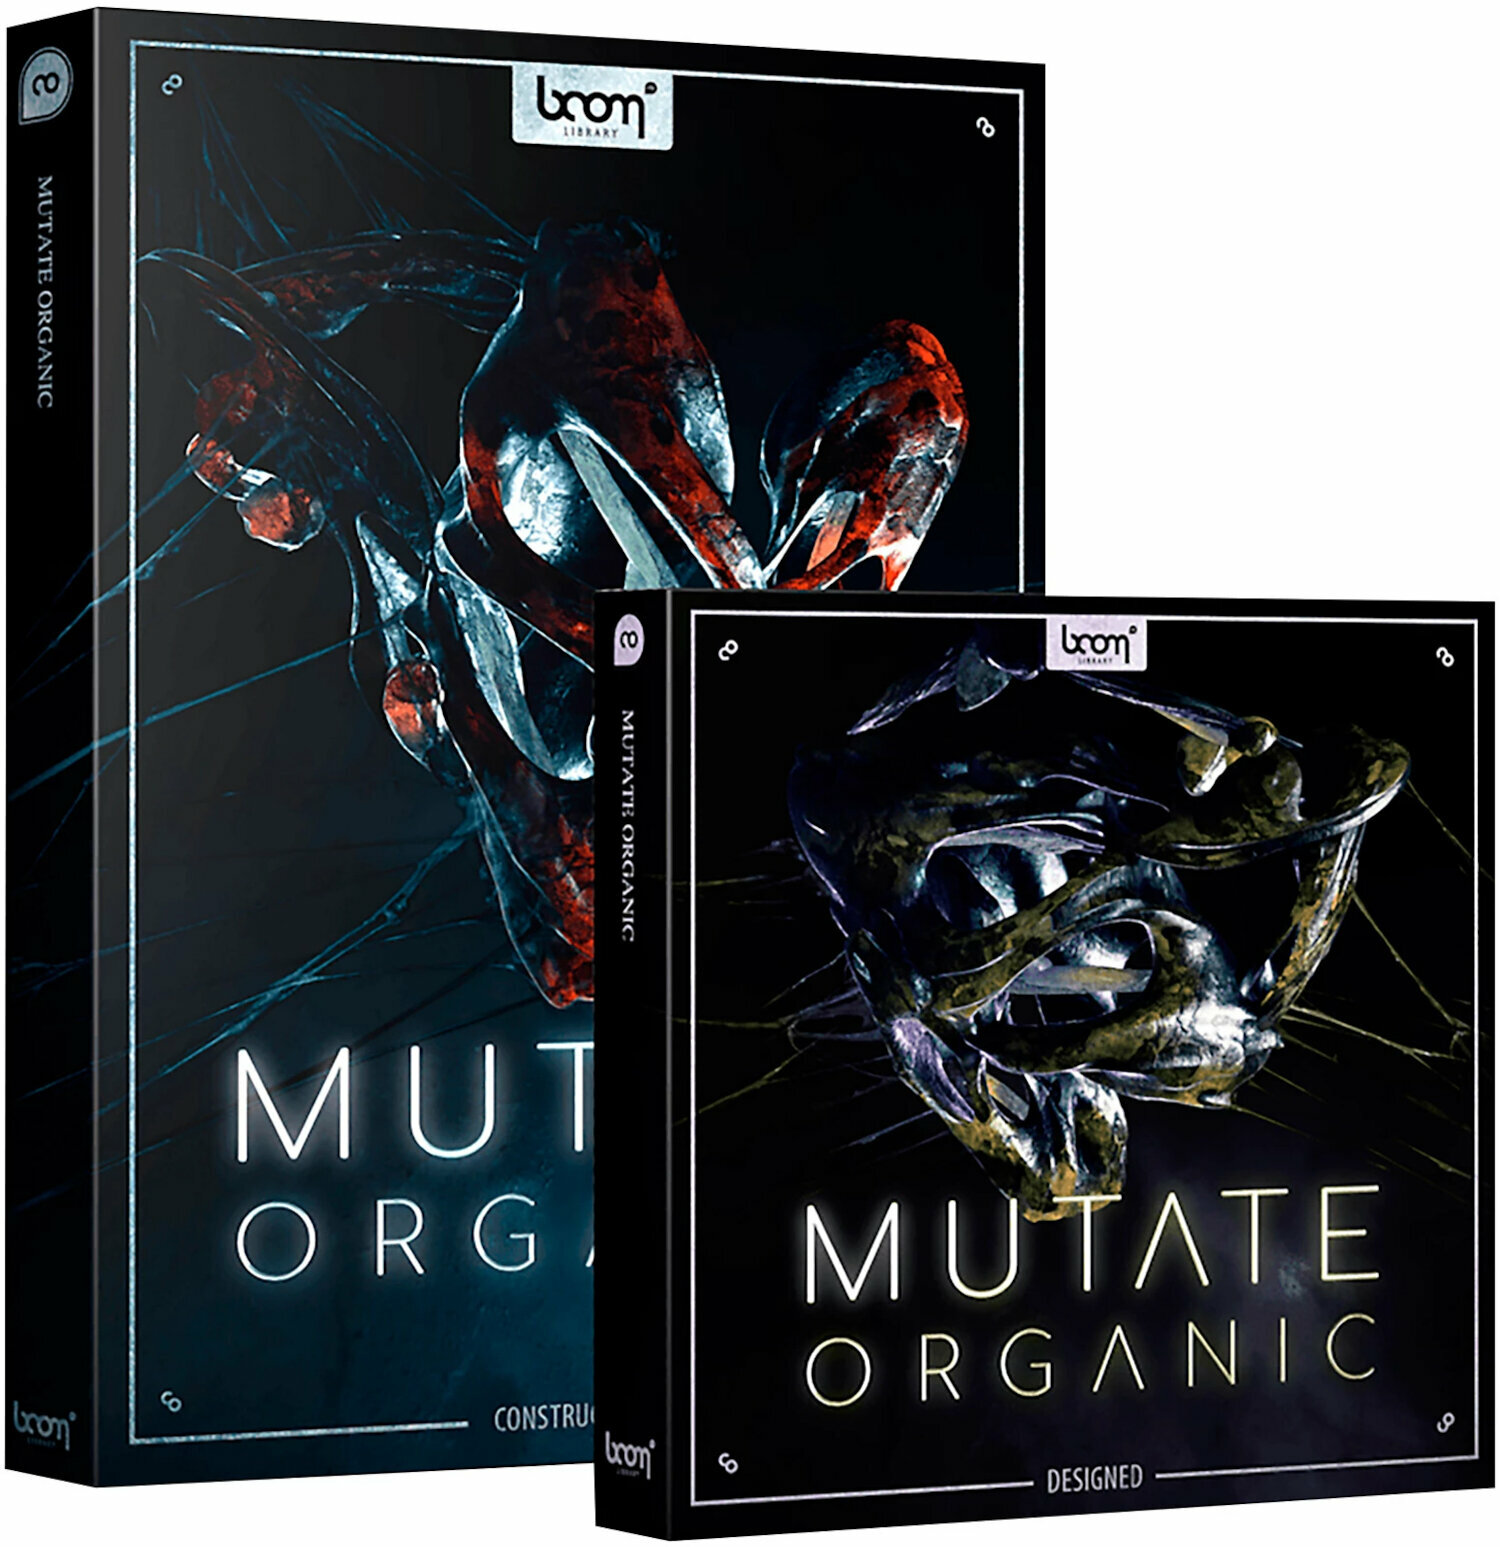 Sample and Sound Library BOOM Library Mutate Organic Bundle (Digital product)